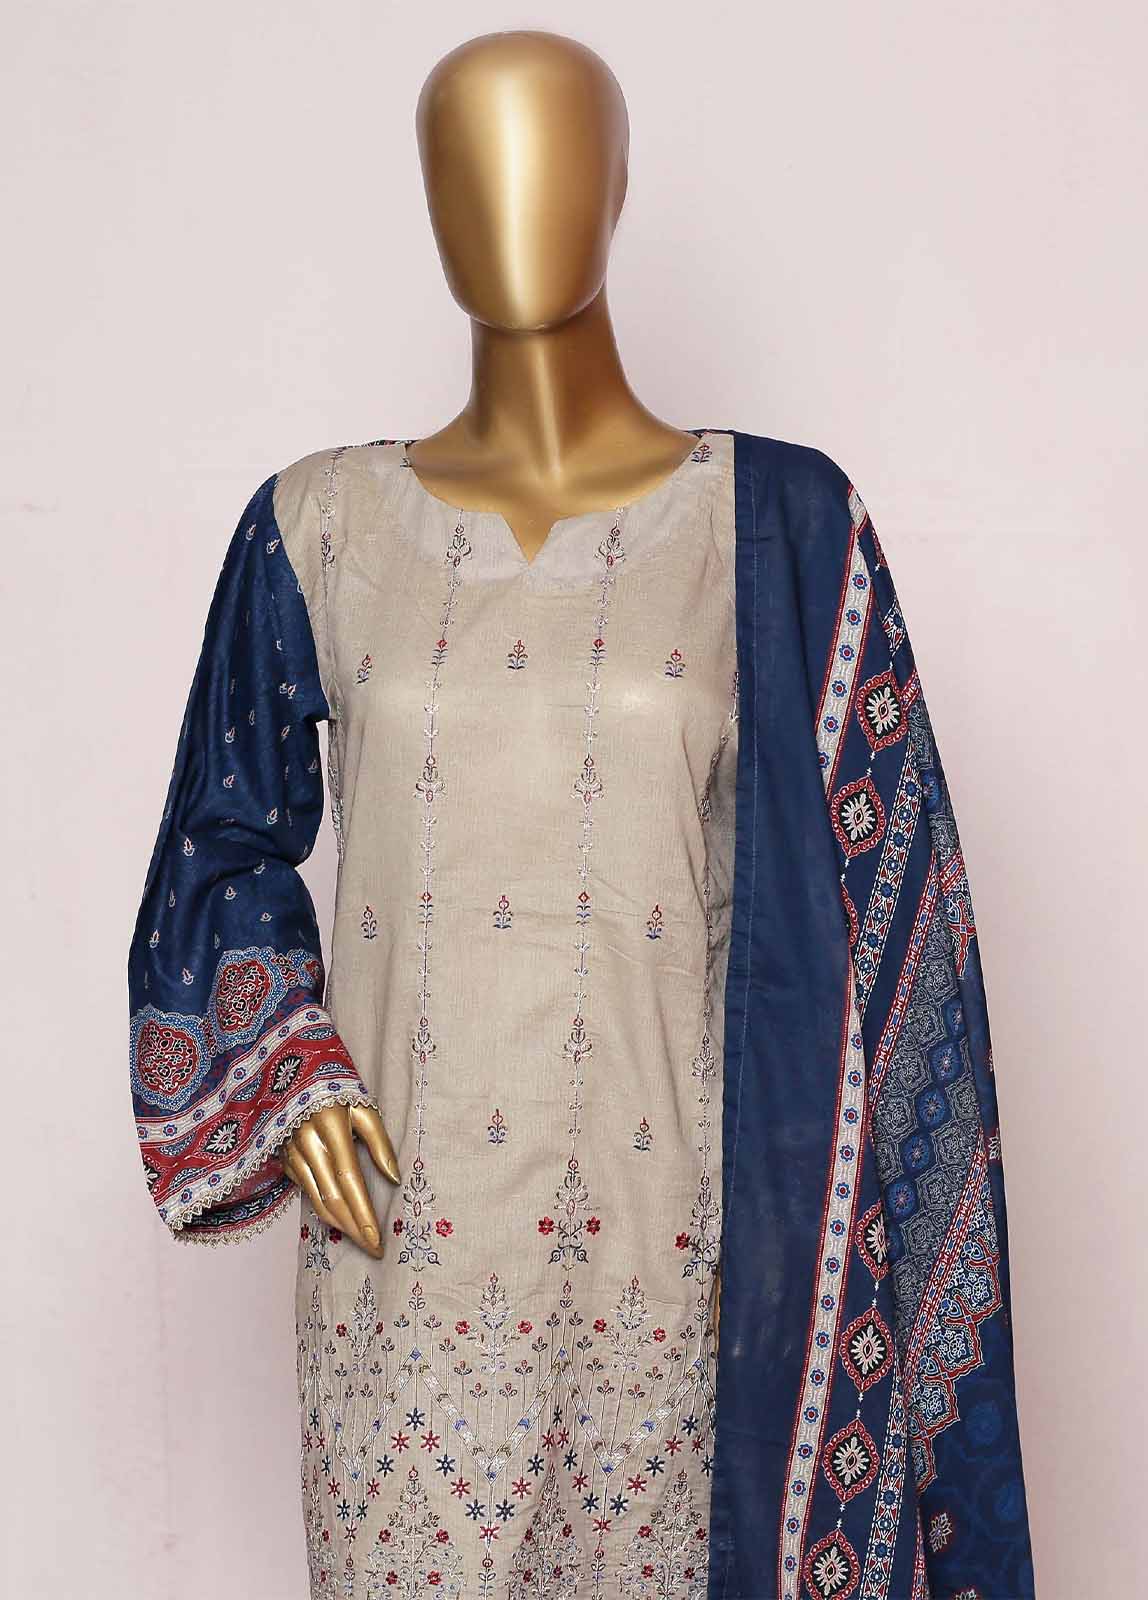 SMLE-0201- 3 Piece Embroidered Stitched Suit